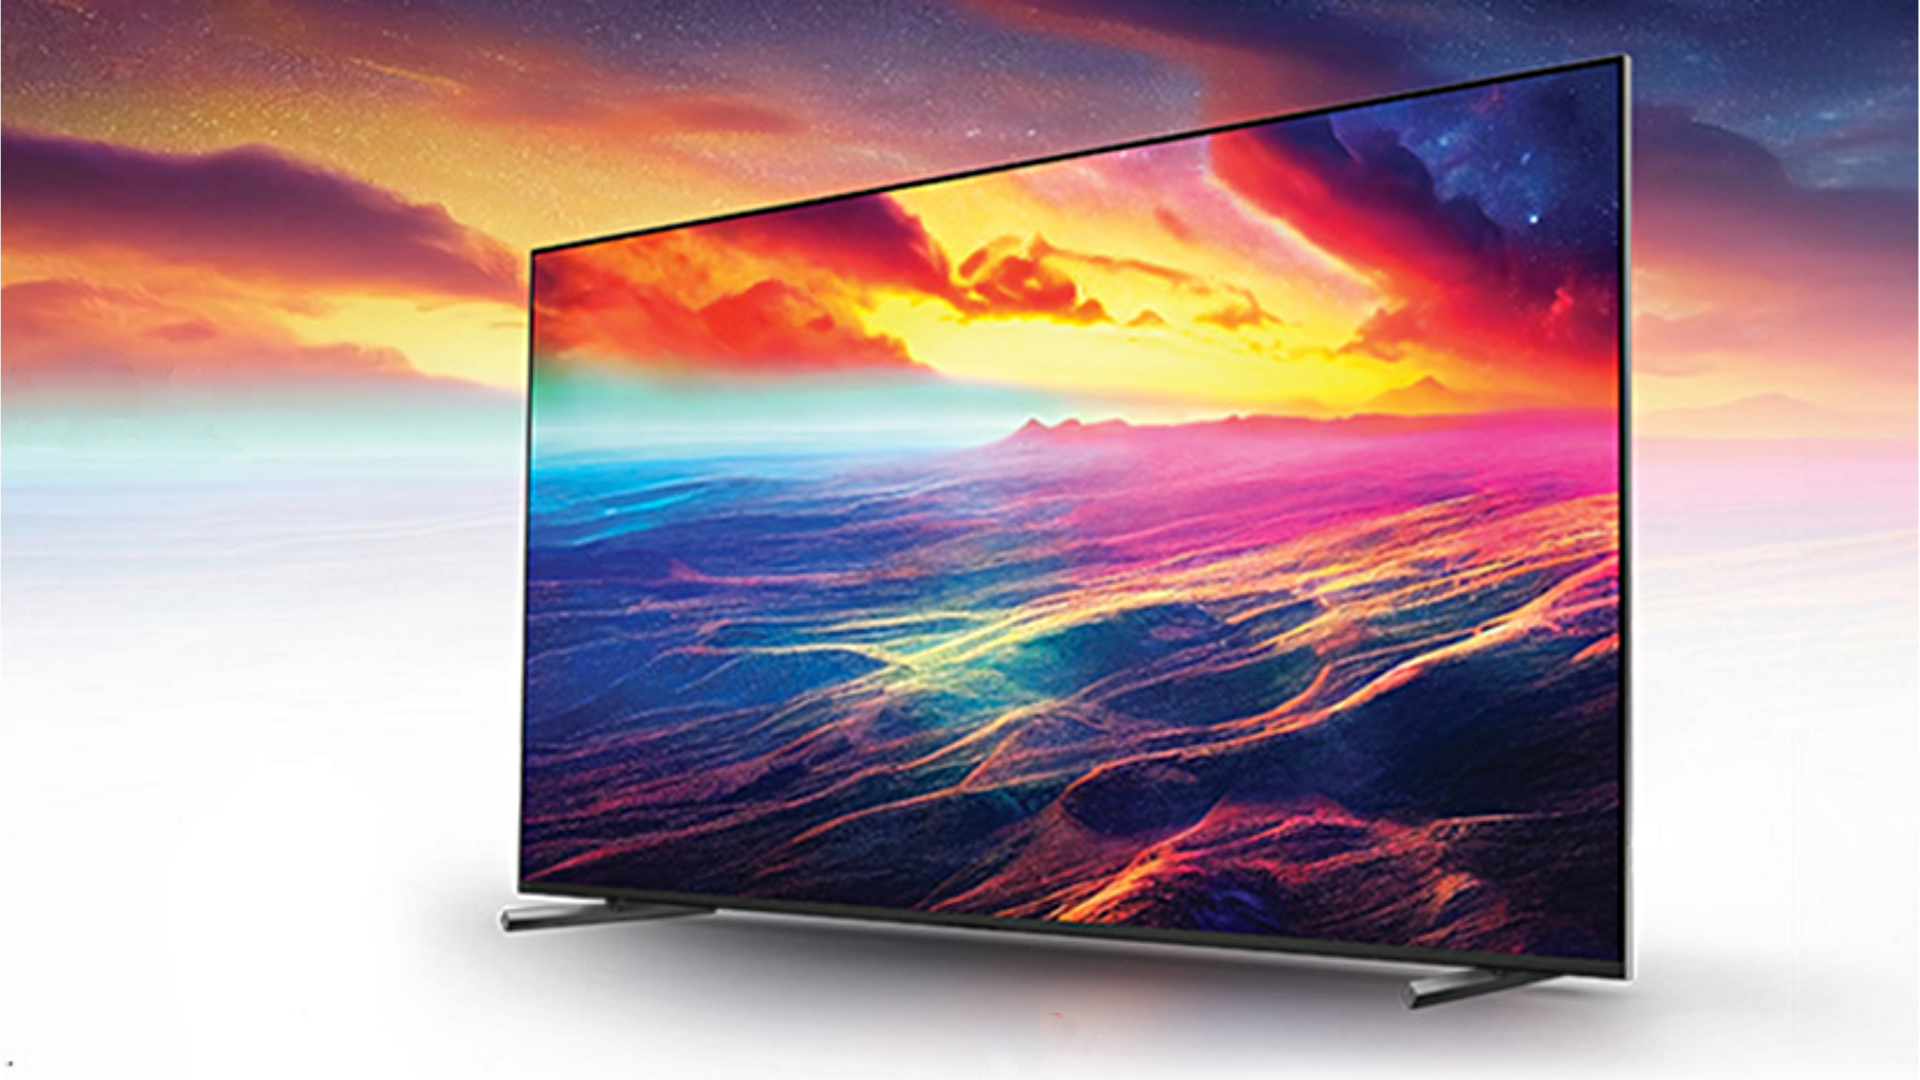 Sony Bravia X90L TVs debut in India: Check features